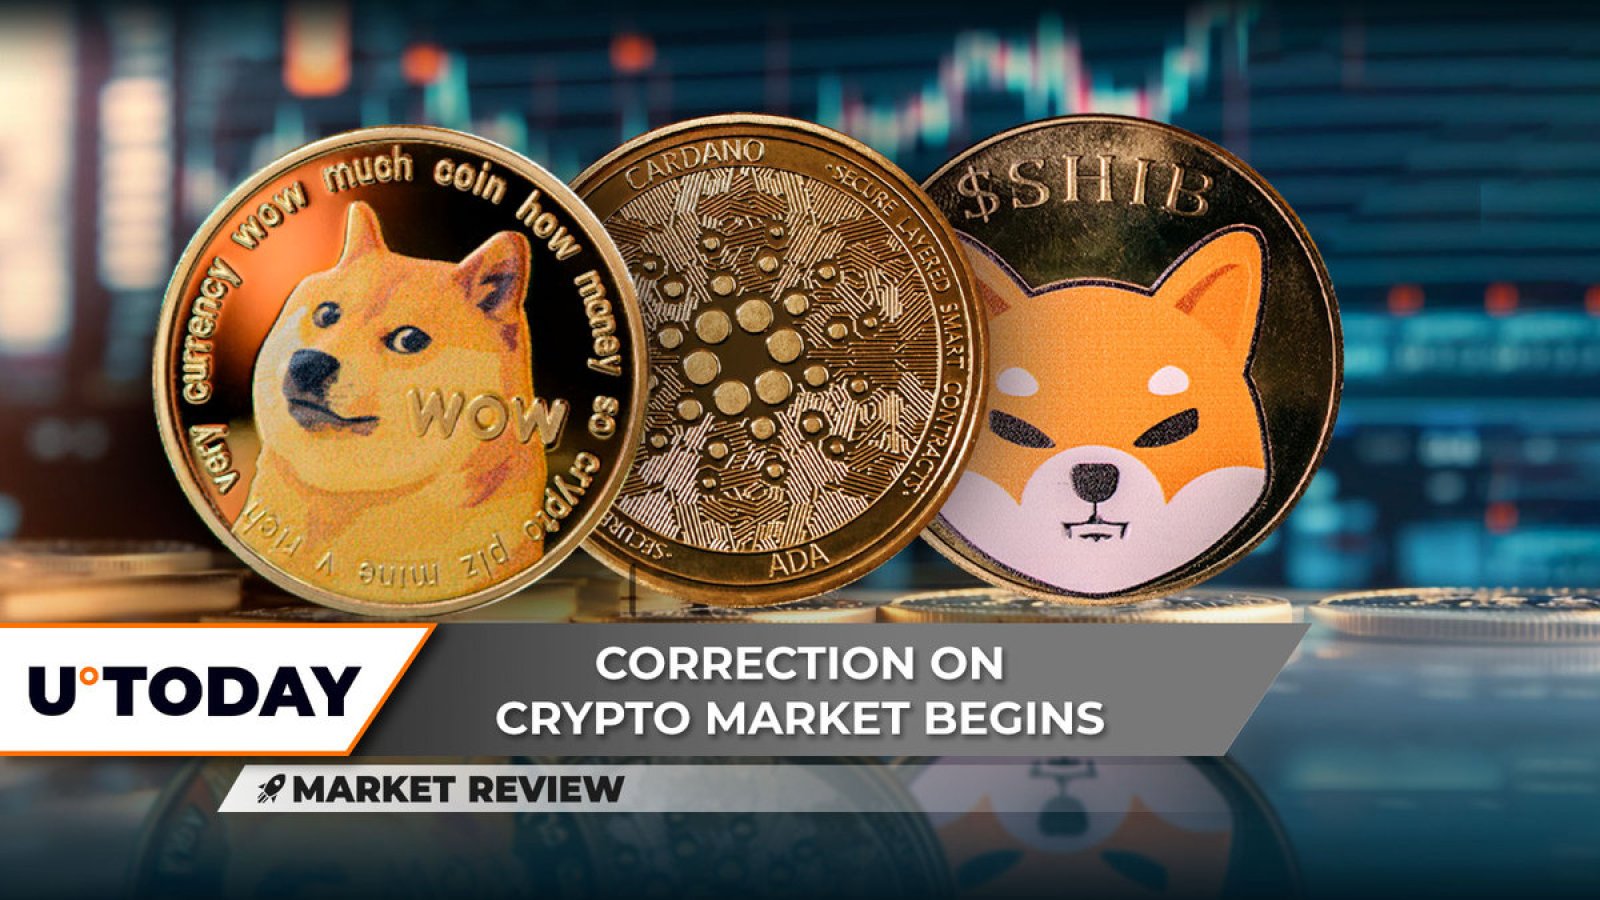 Dogecoin (DOGE) Delivers Important Signal, Did Cardano (ADA) Form Double Top Pattern? Shiba Inu (SHIB) Correction Starts